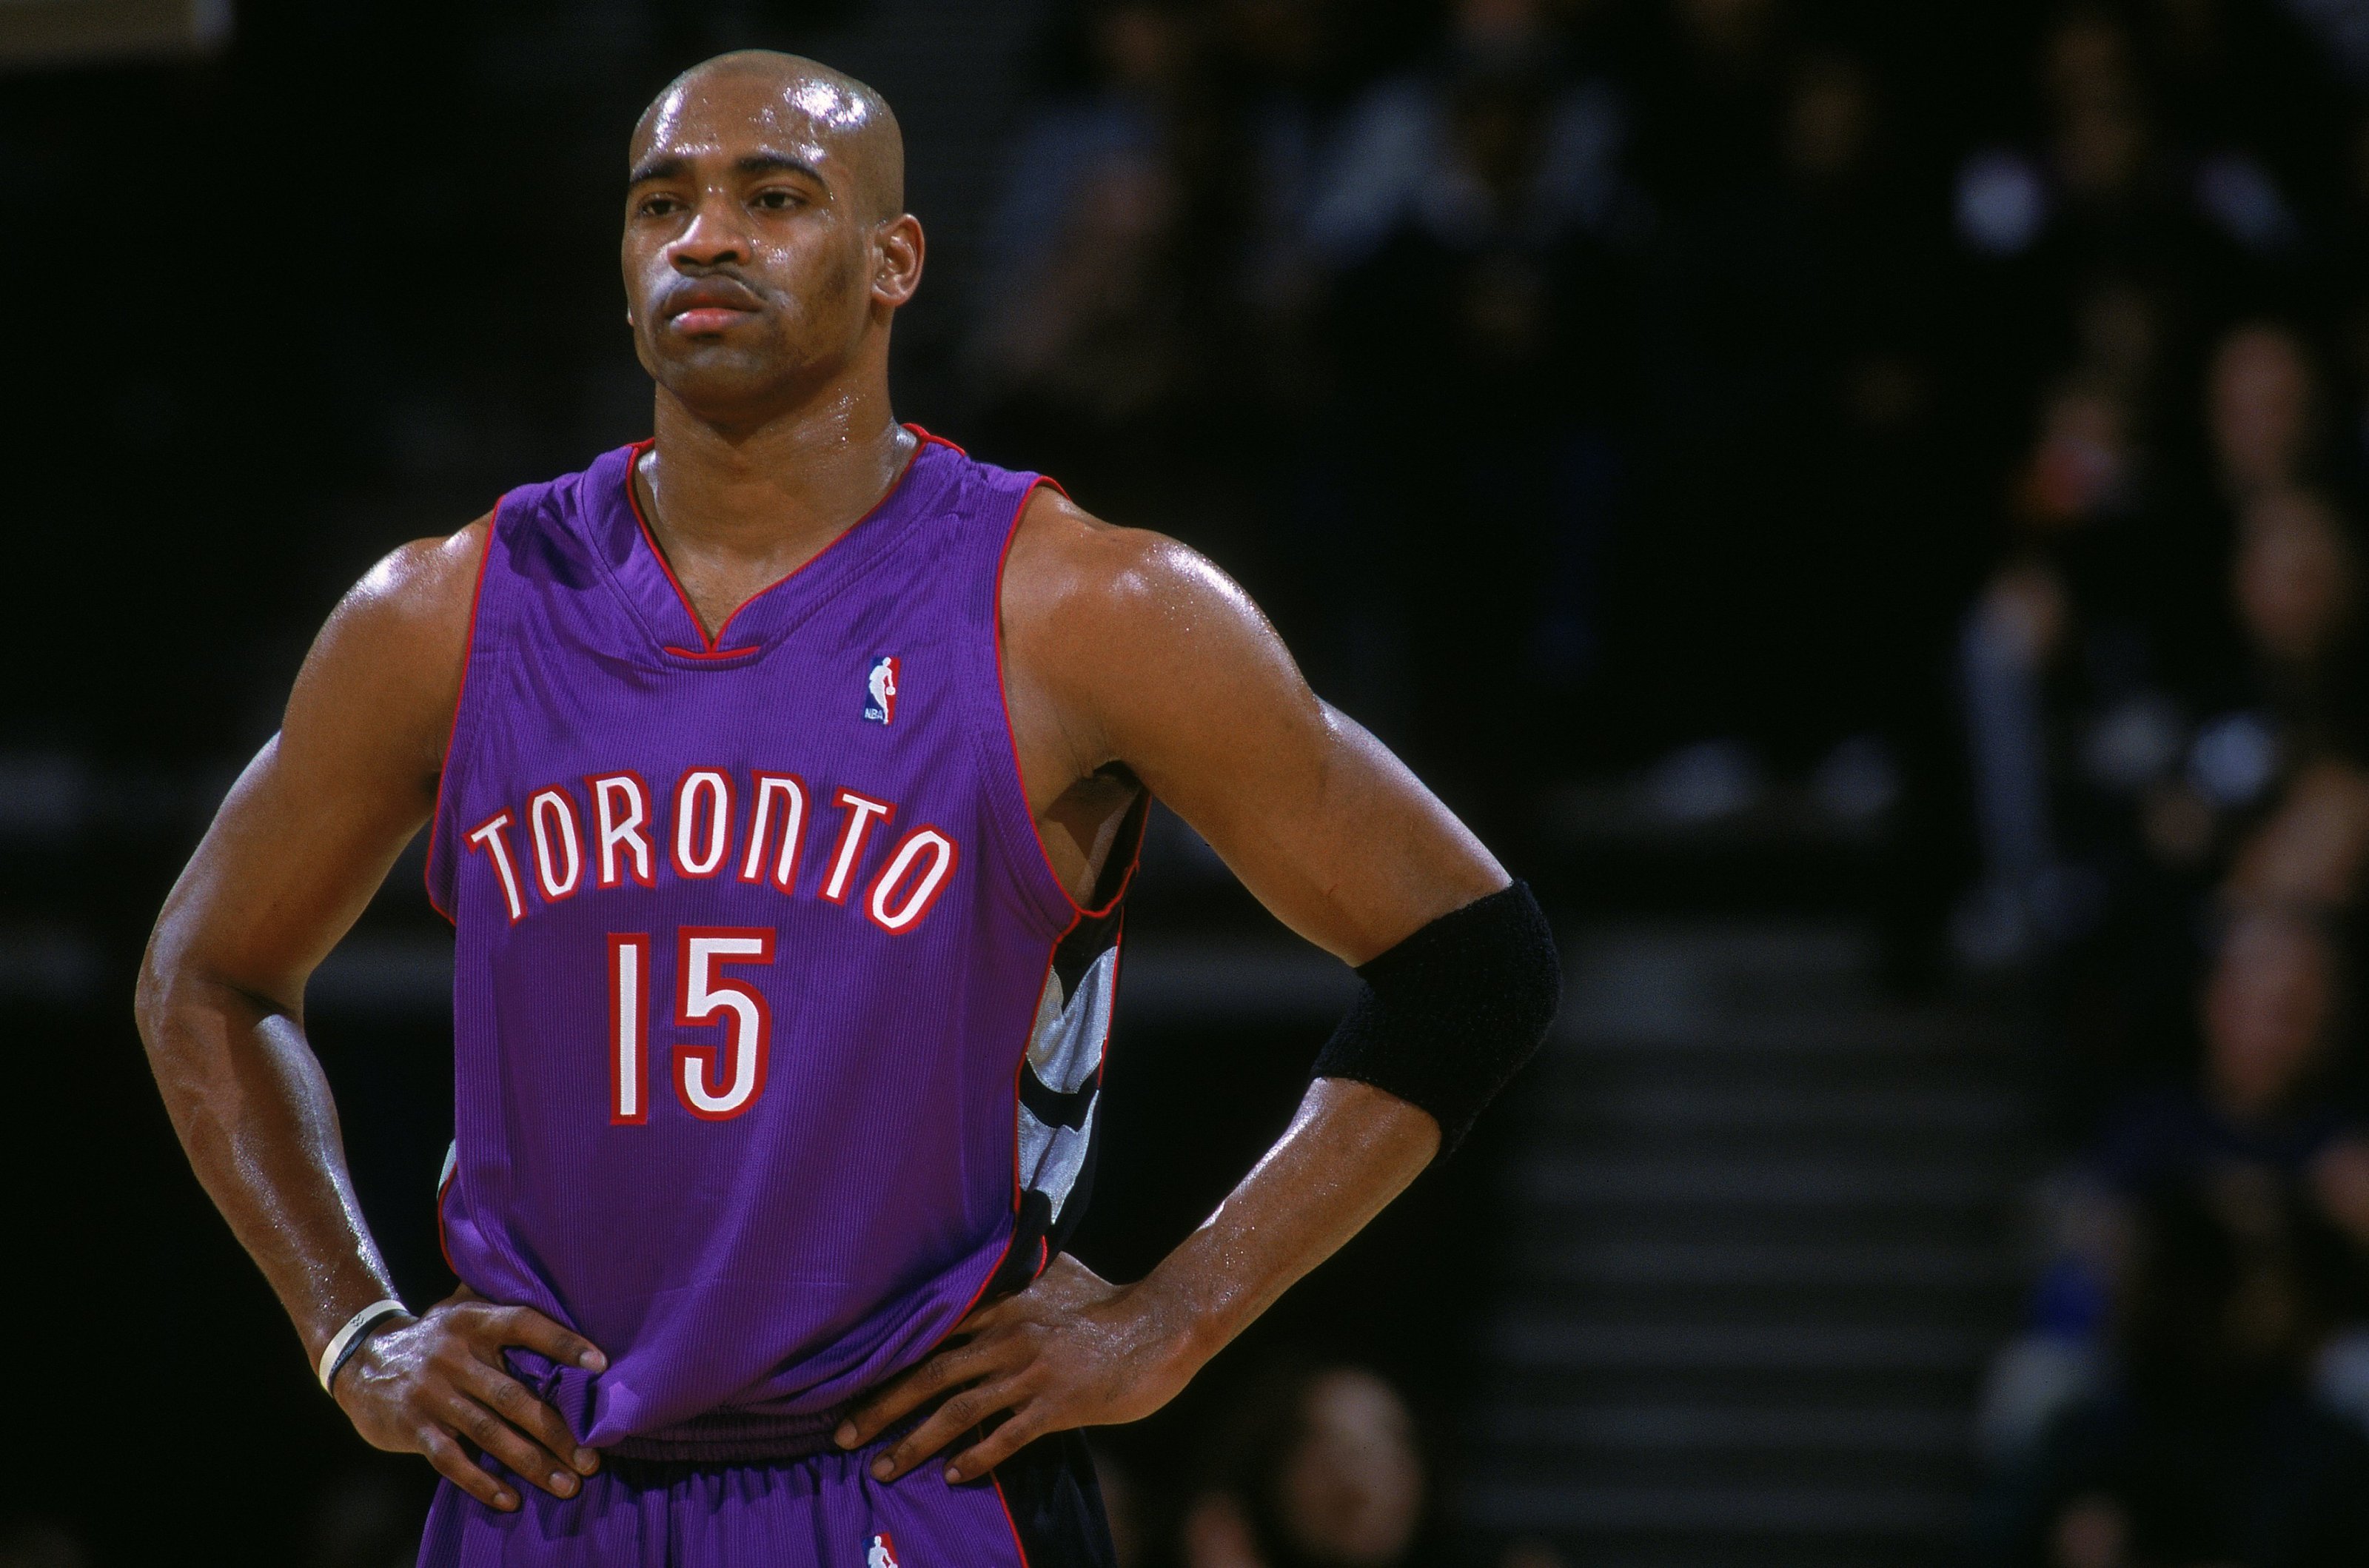 Vince Carter's best moments with the Toronto Raptors